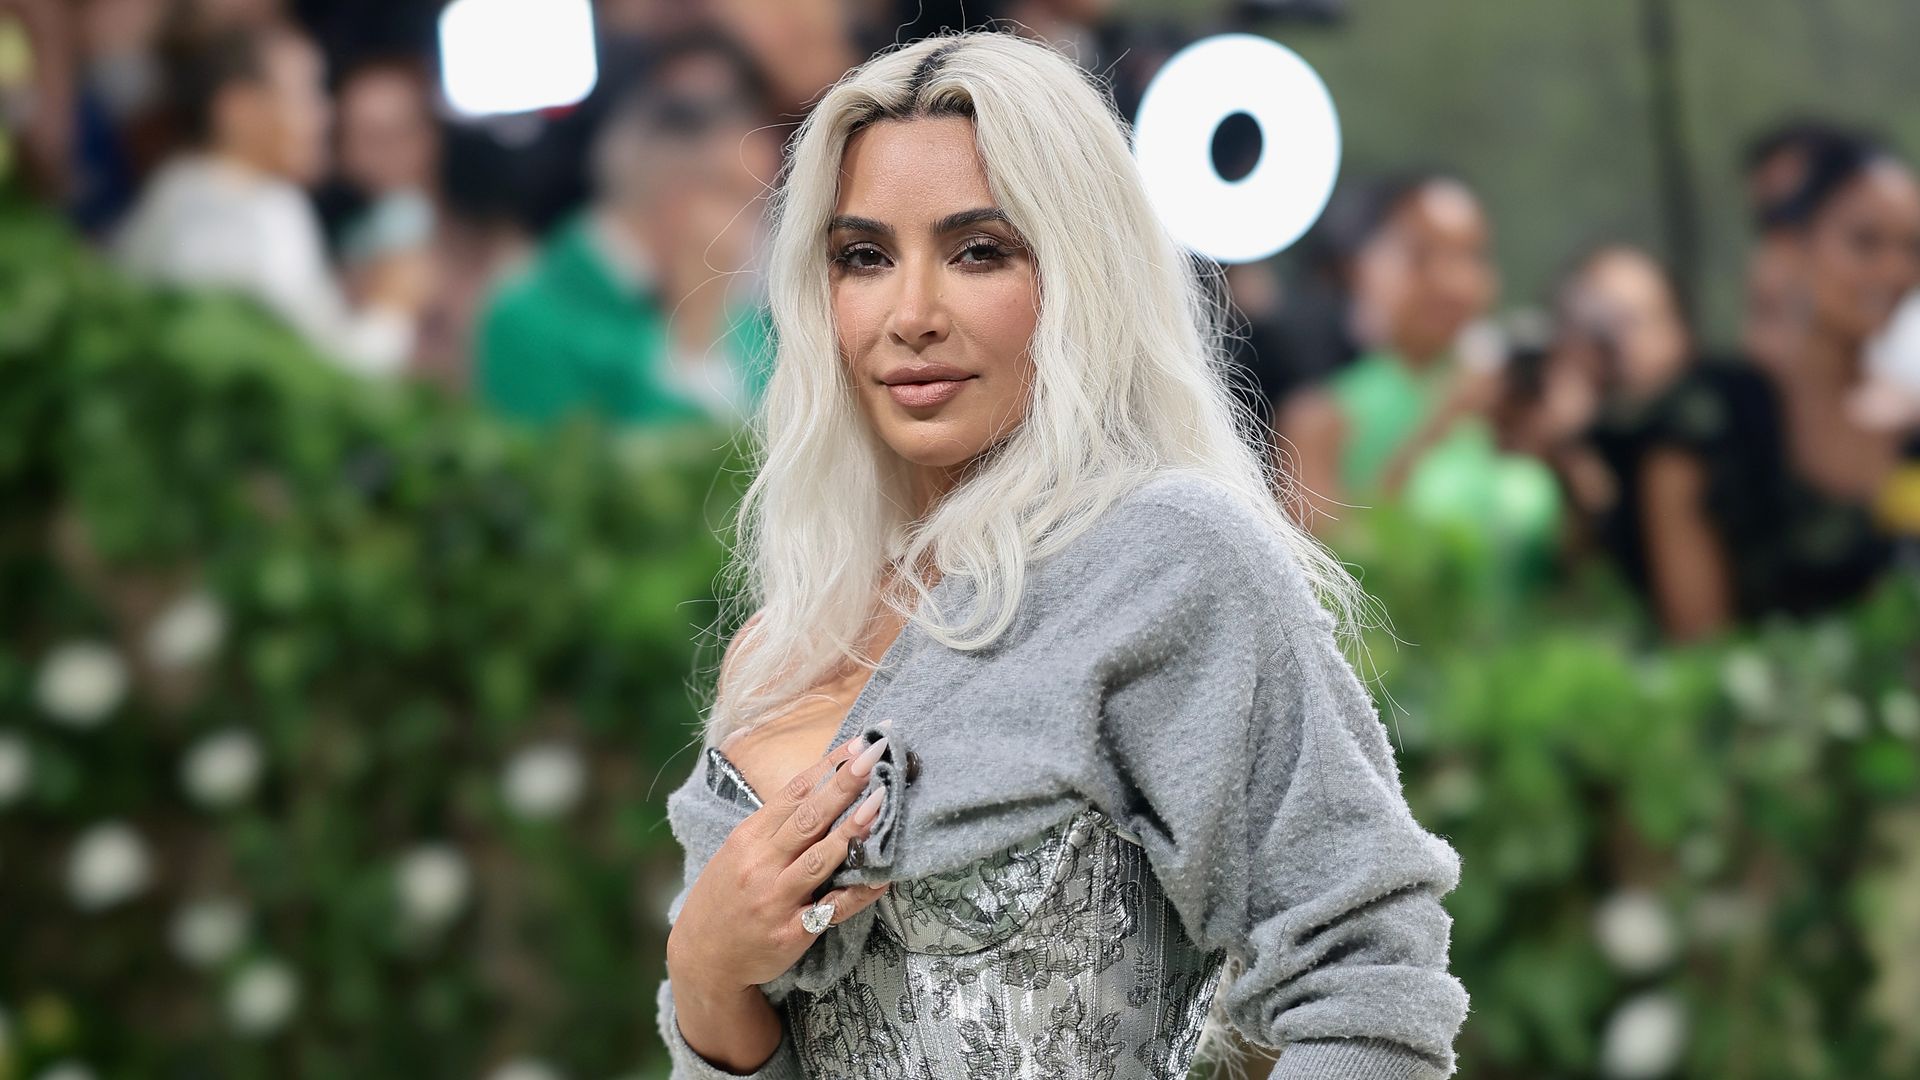 Kim Kardashian's upcoming drama includes Halle Berry and more acting heavy-hitters